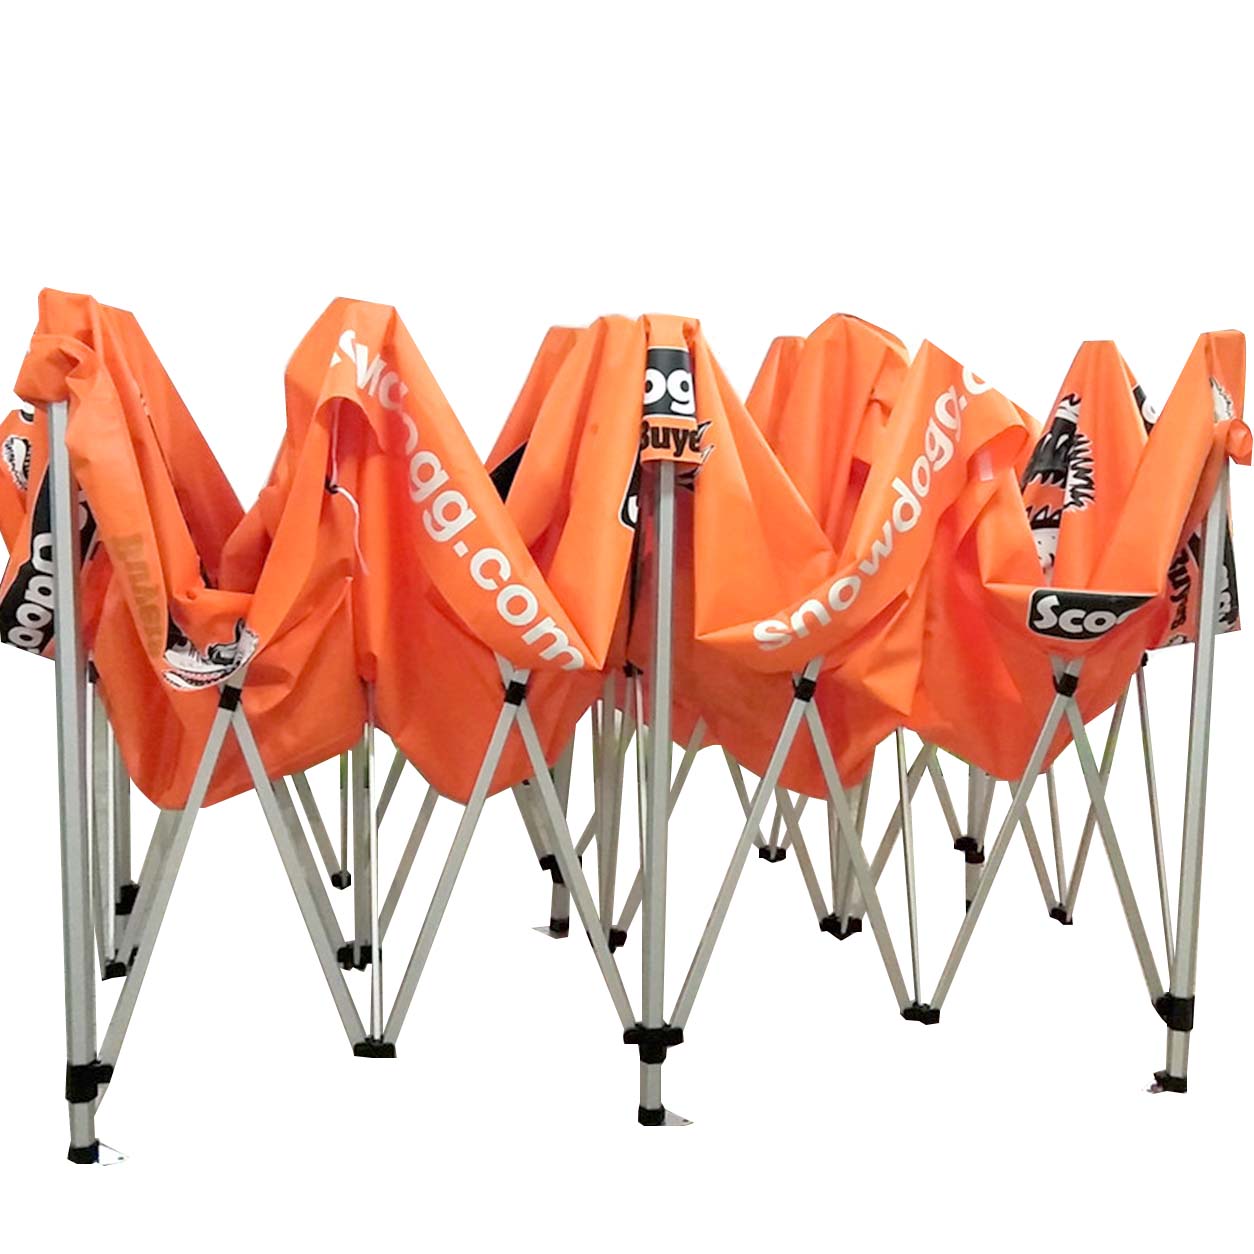 FeaMont best lightweight pop up canopy certifications for sporting-1